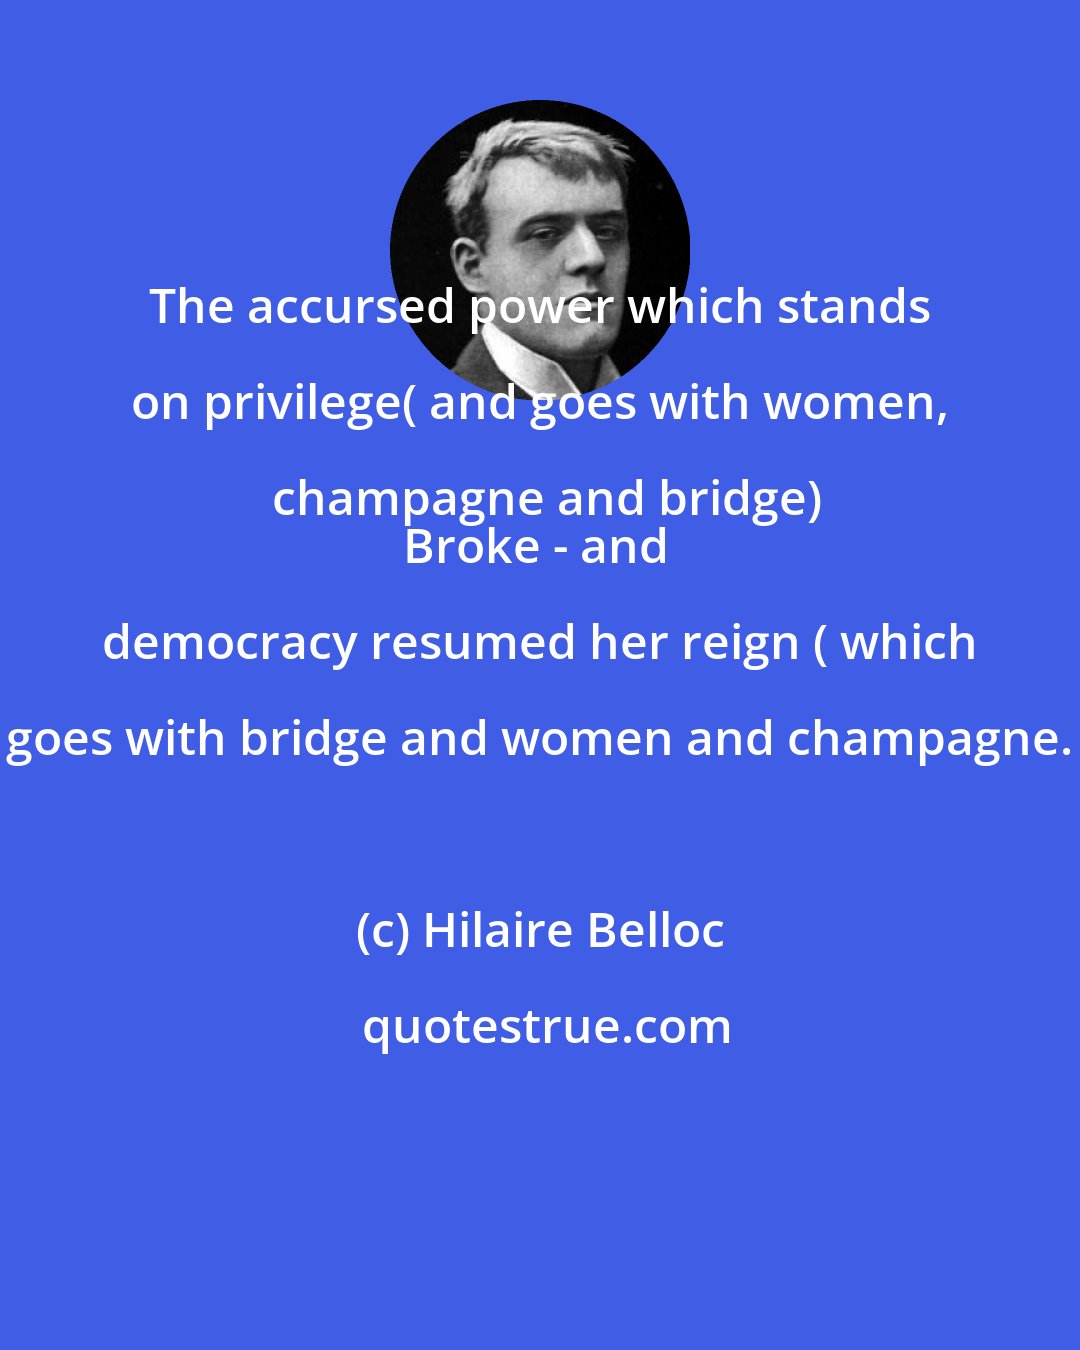 Hilaire Belloc: The accursed power which stands on privilege( and goes with women, champagne and bridge)
Broke - and democracy resumed her reign ( which goes with bridge and women and champagne.